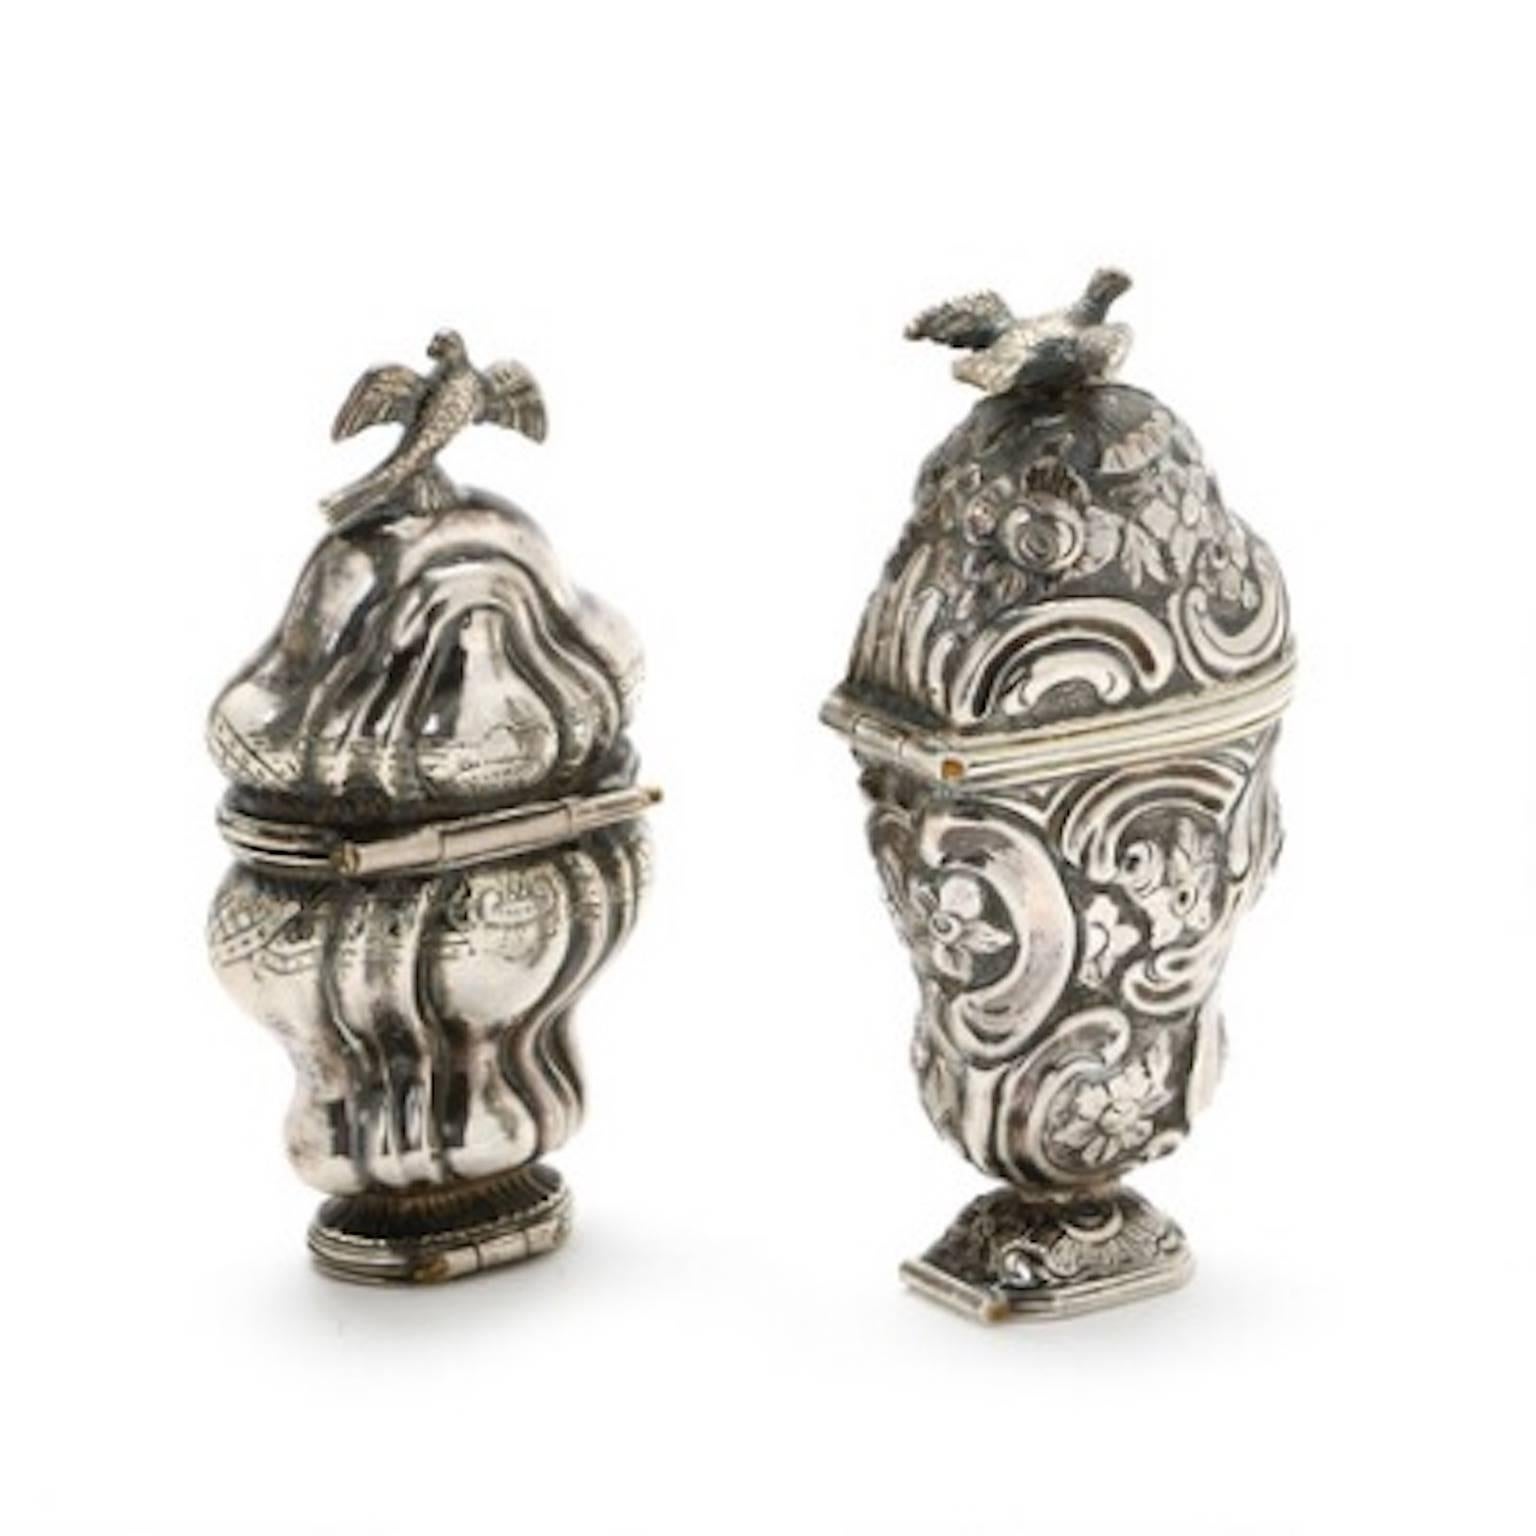 Two Rococo silver vinaigrettes, lids adorned with birds, 18th century. Measures: H 7 and 8 cm. (2)